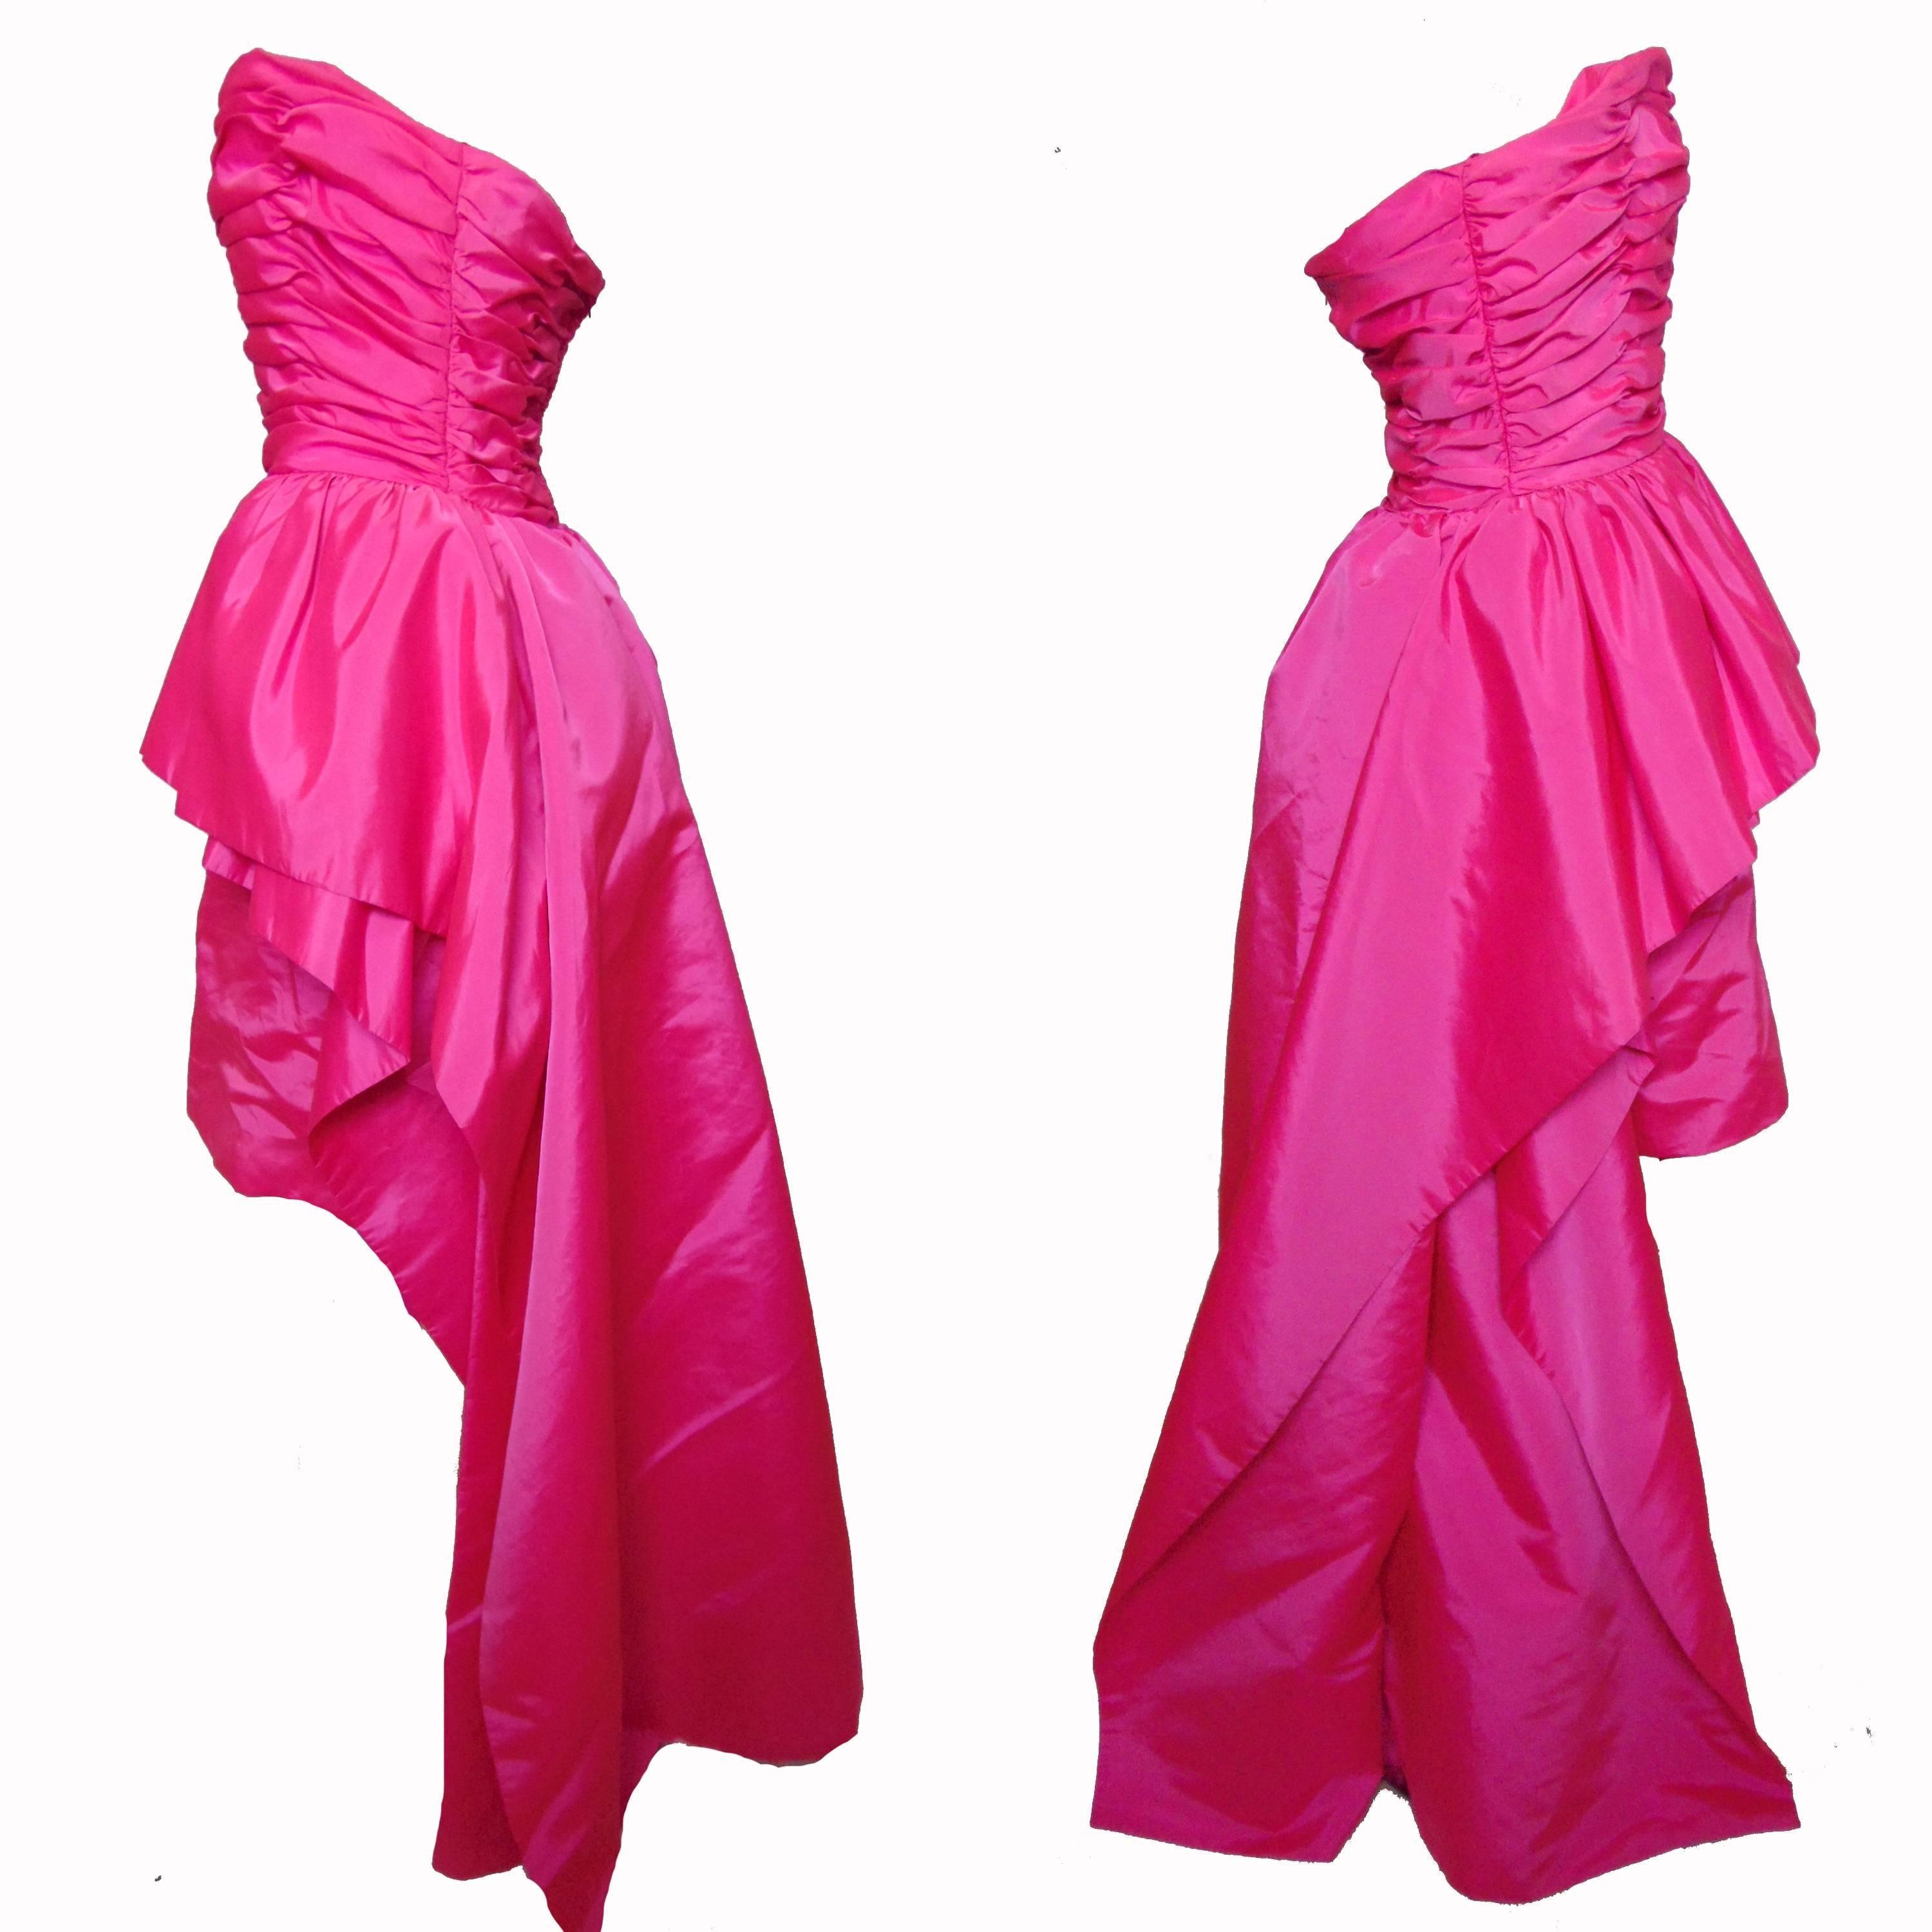 Victor Costa for Saks Fifth Ave Evening Gown Bubblegum Pink Taffeta 90s Sz 8/10 1